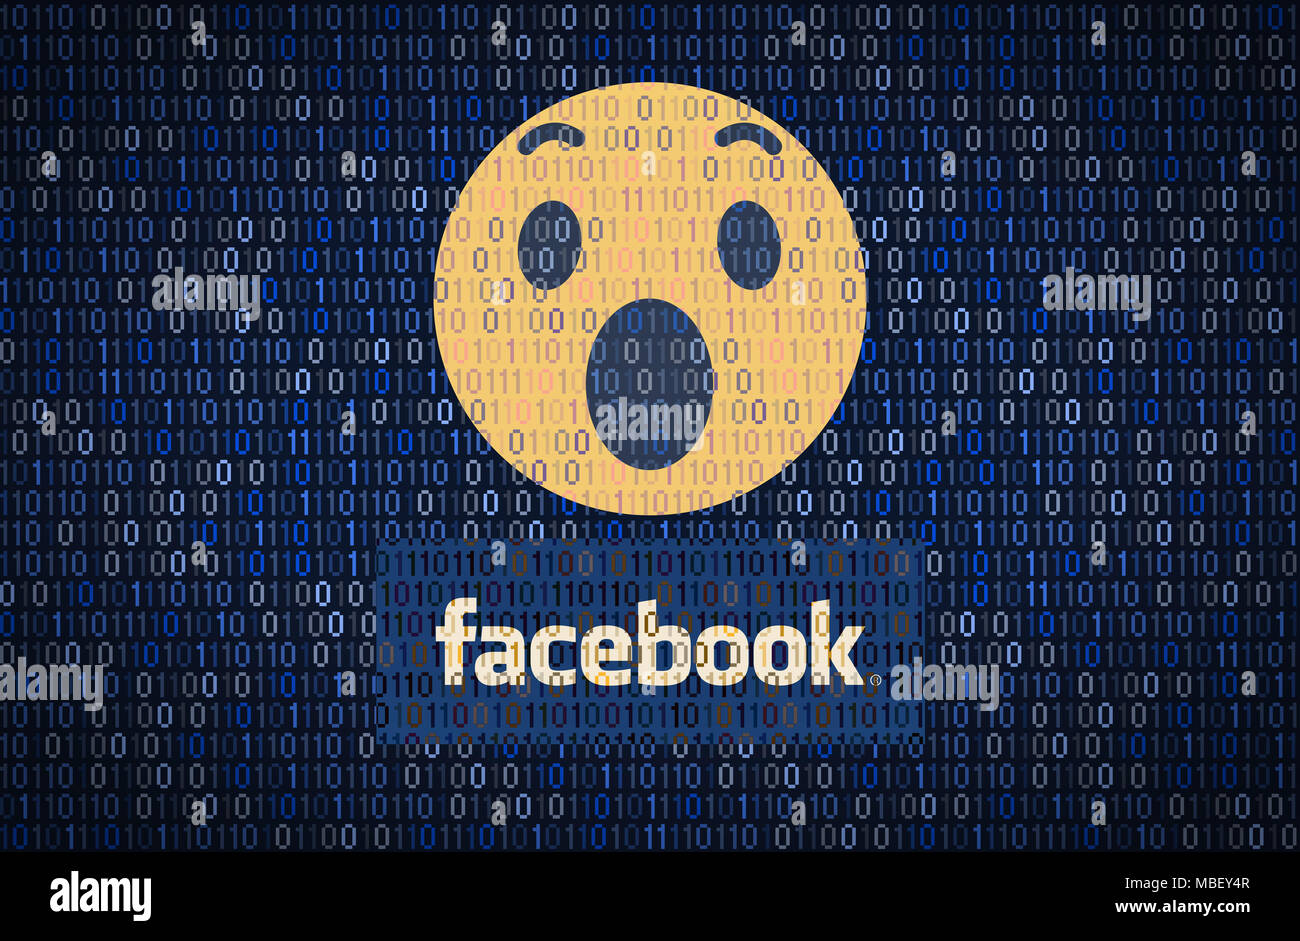 GALATI, ROMANIA - 10 APRIL 2018: Facebook data security and privacy issues. Data encription concept Stock Photo